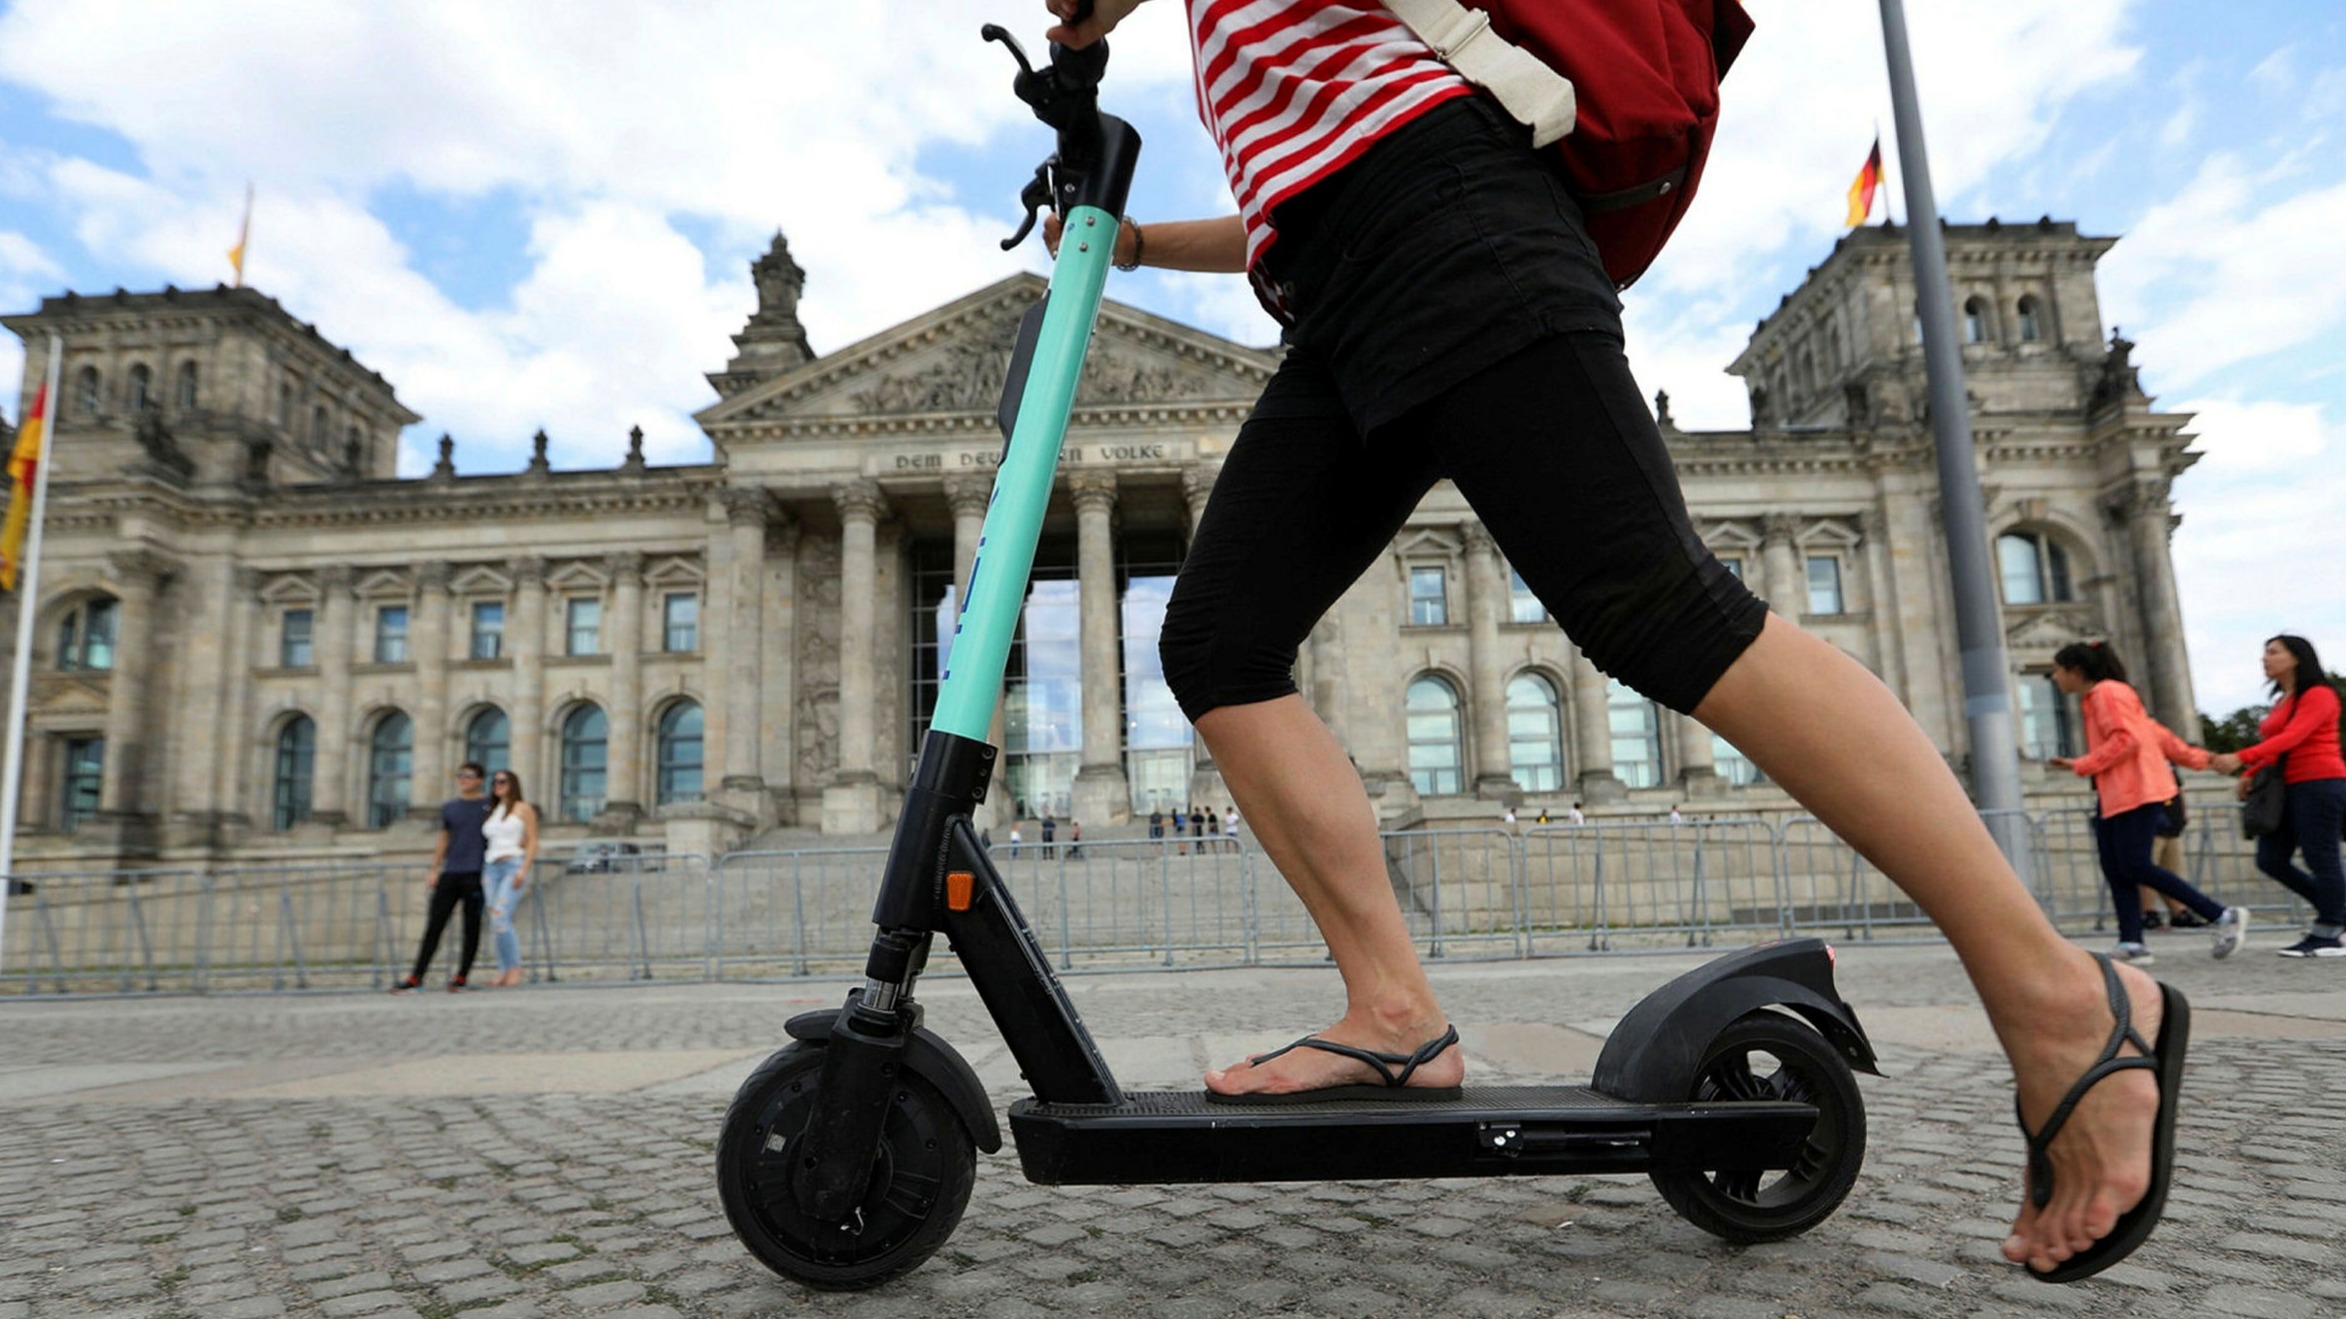 softbank jumps into e-scooters with $250m tier mobility deal | financial times